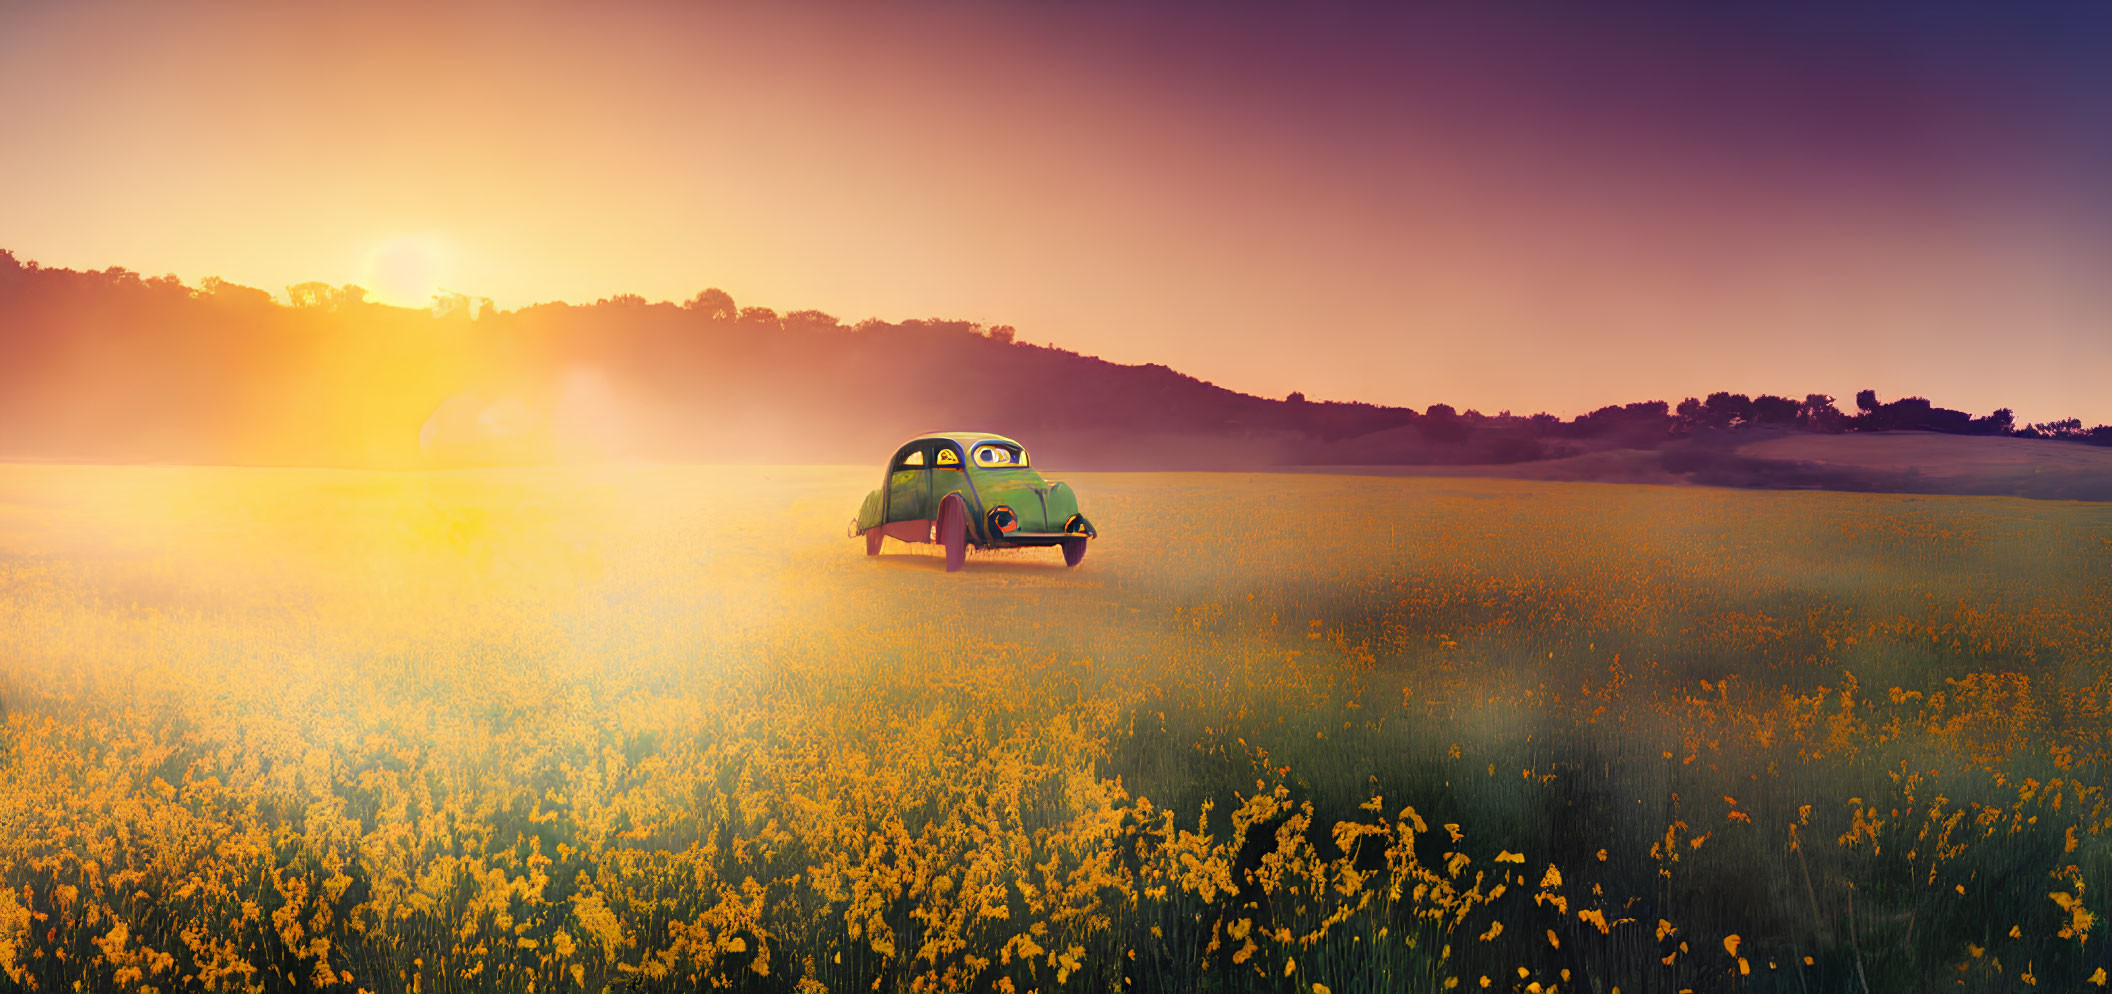 Vintage Car in Field of Yellow Flowers at Sunset